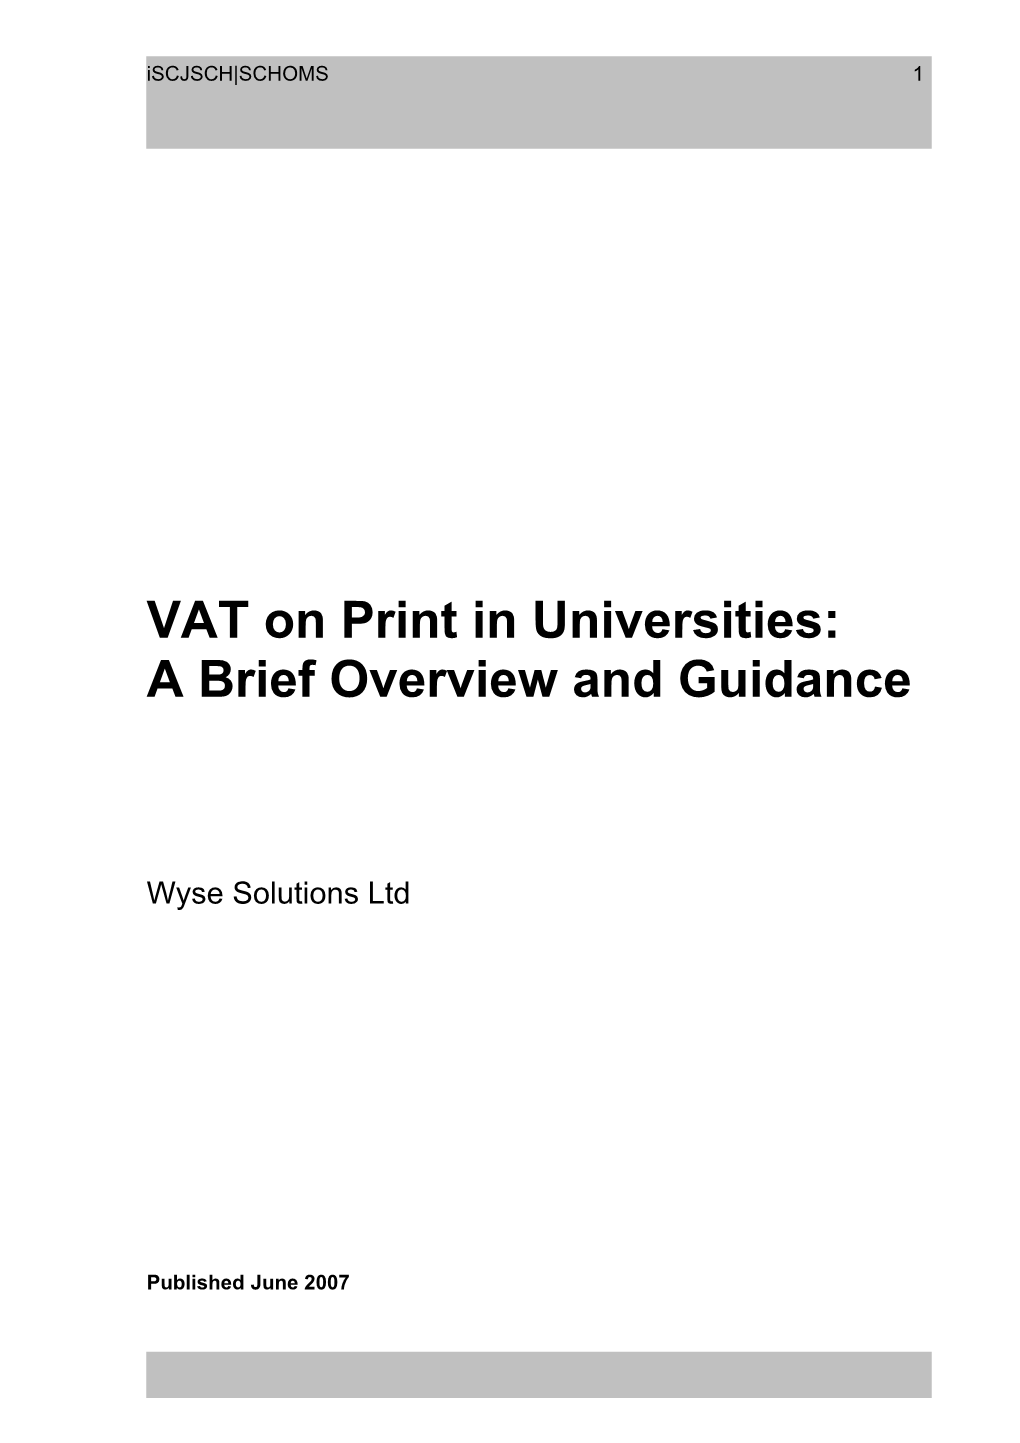 An Introduction to VAT